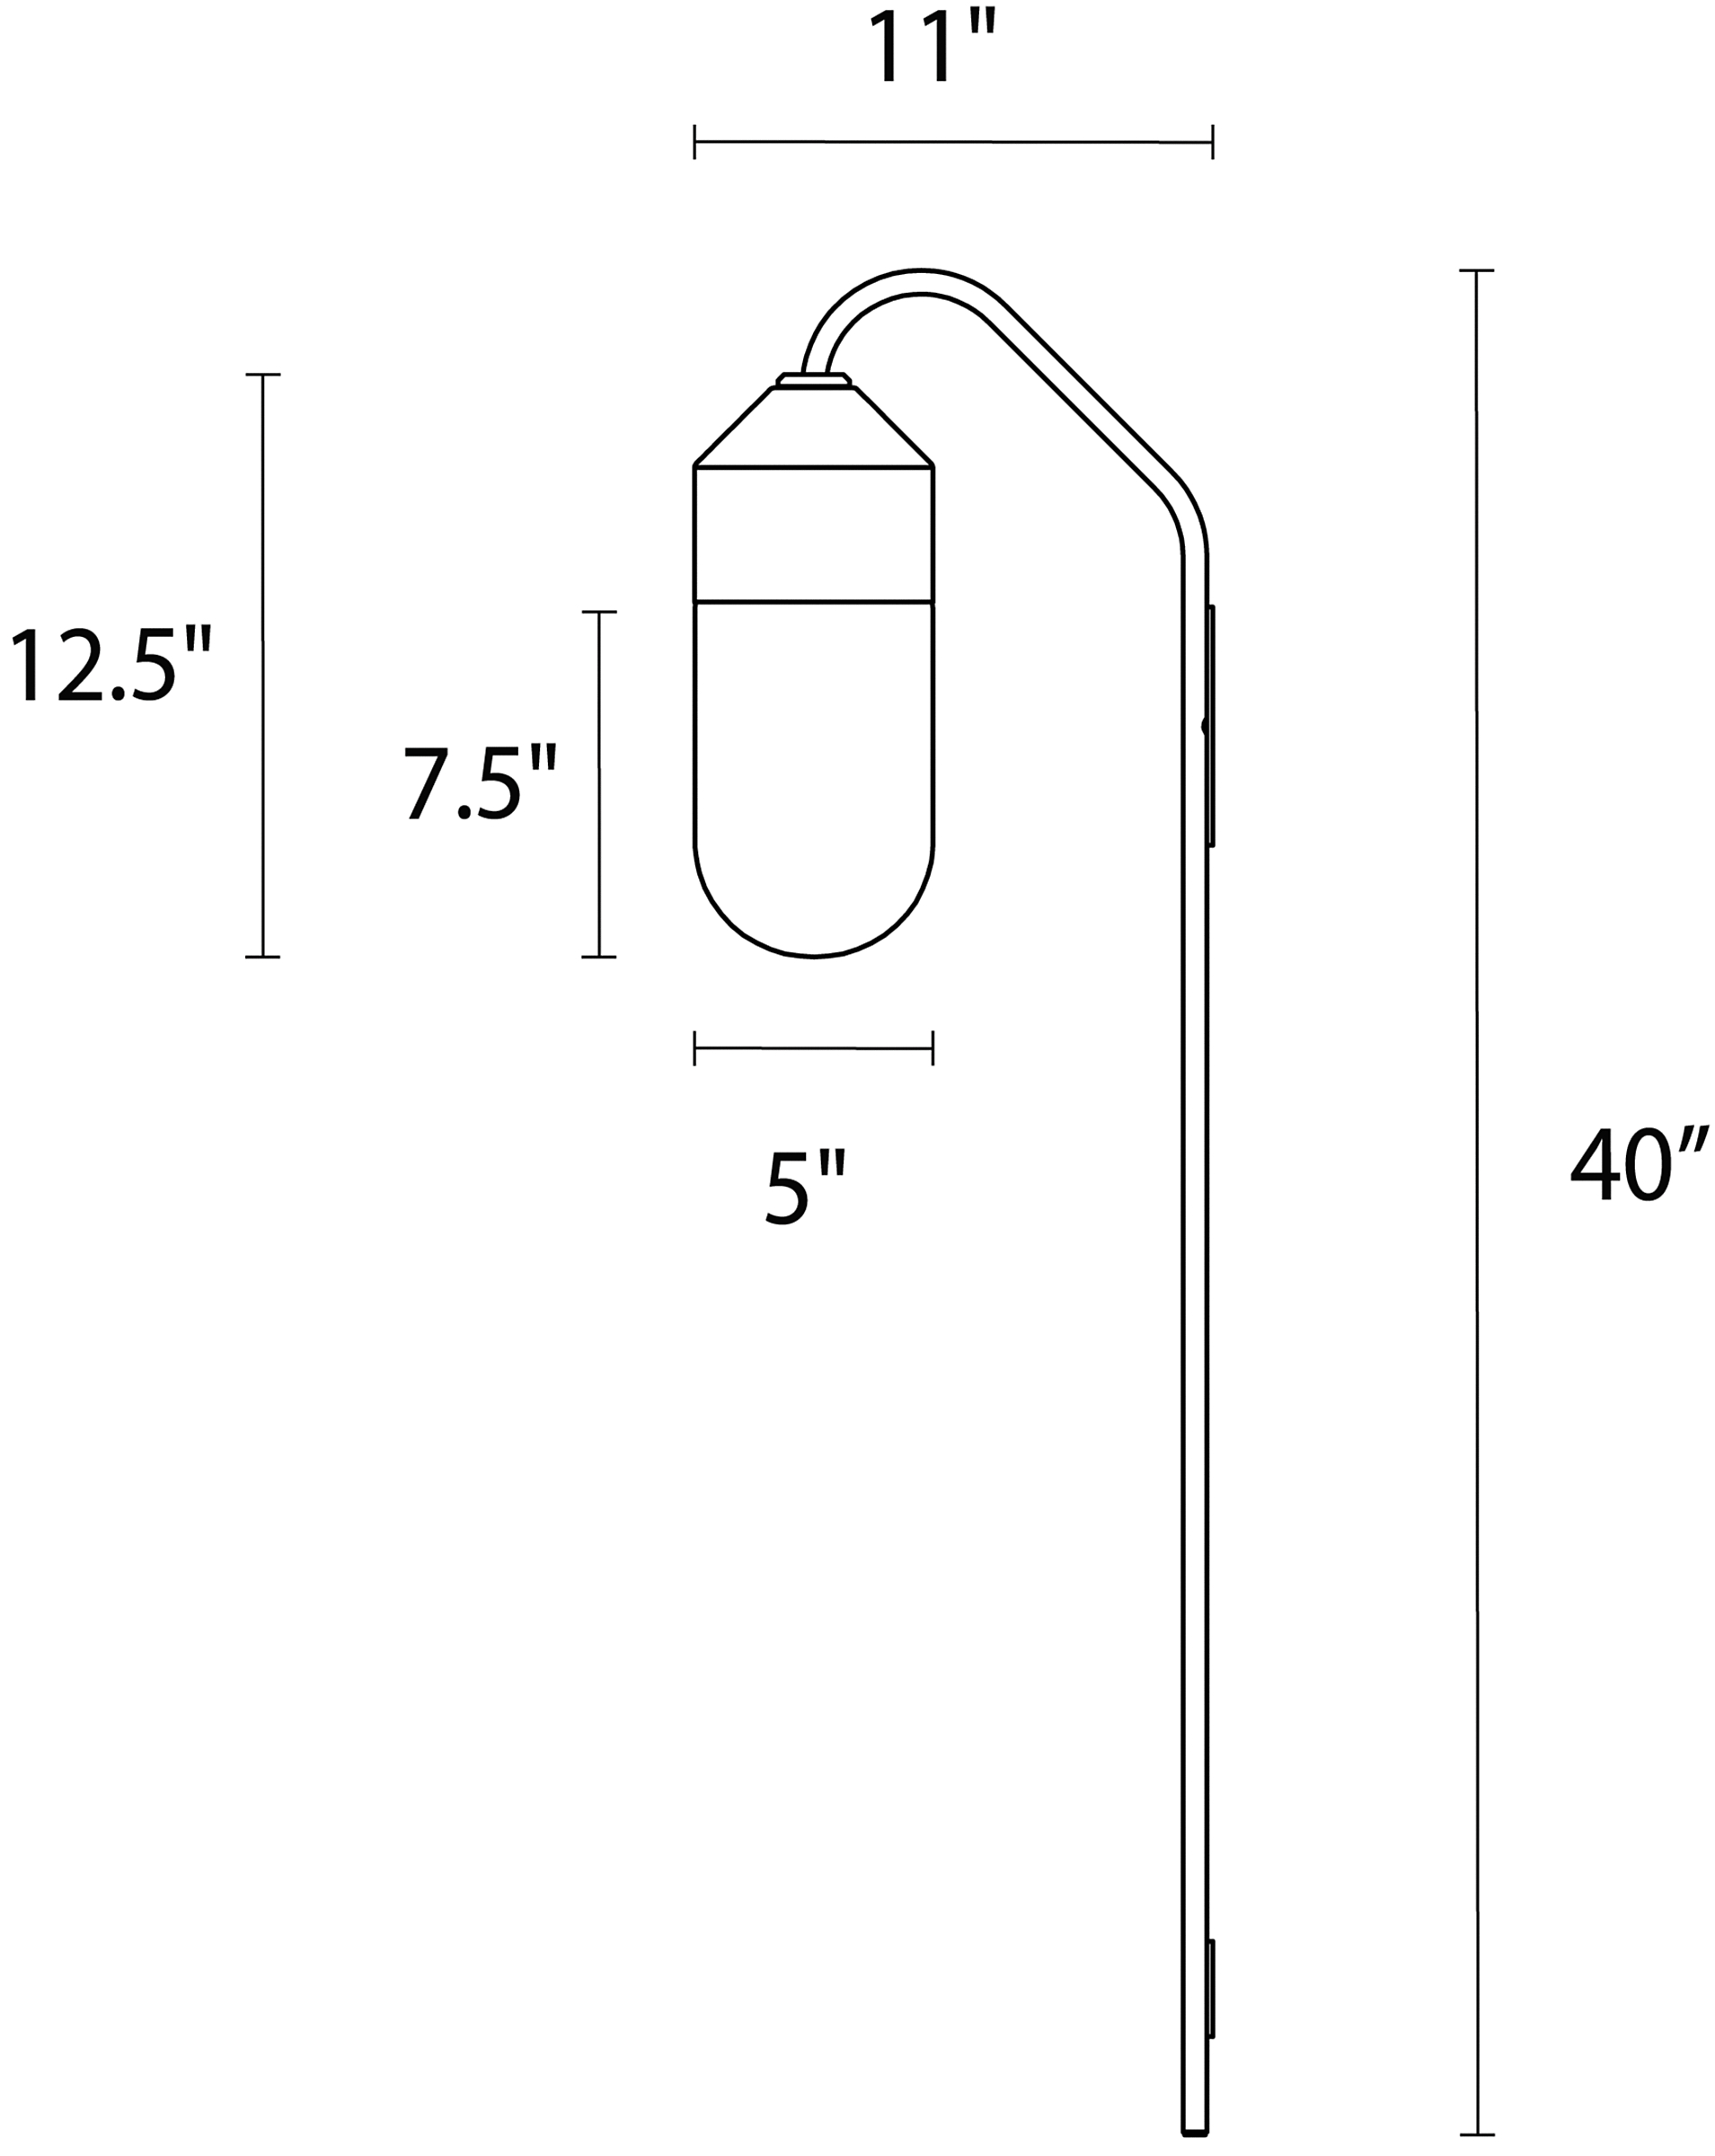 Ballad Long Wall Sconce Dimension Drawing.